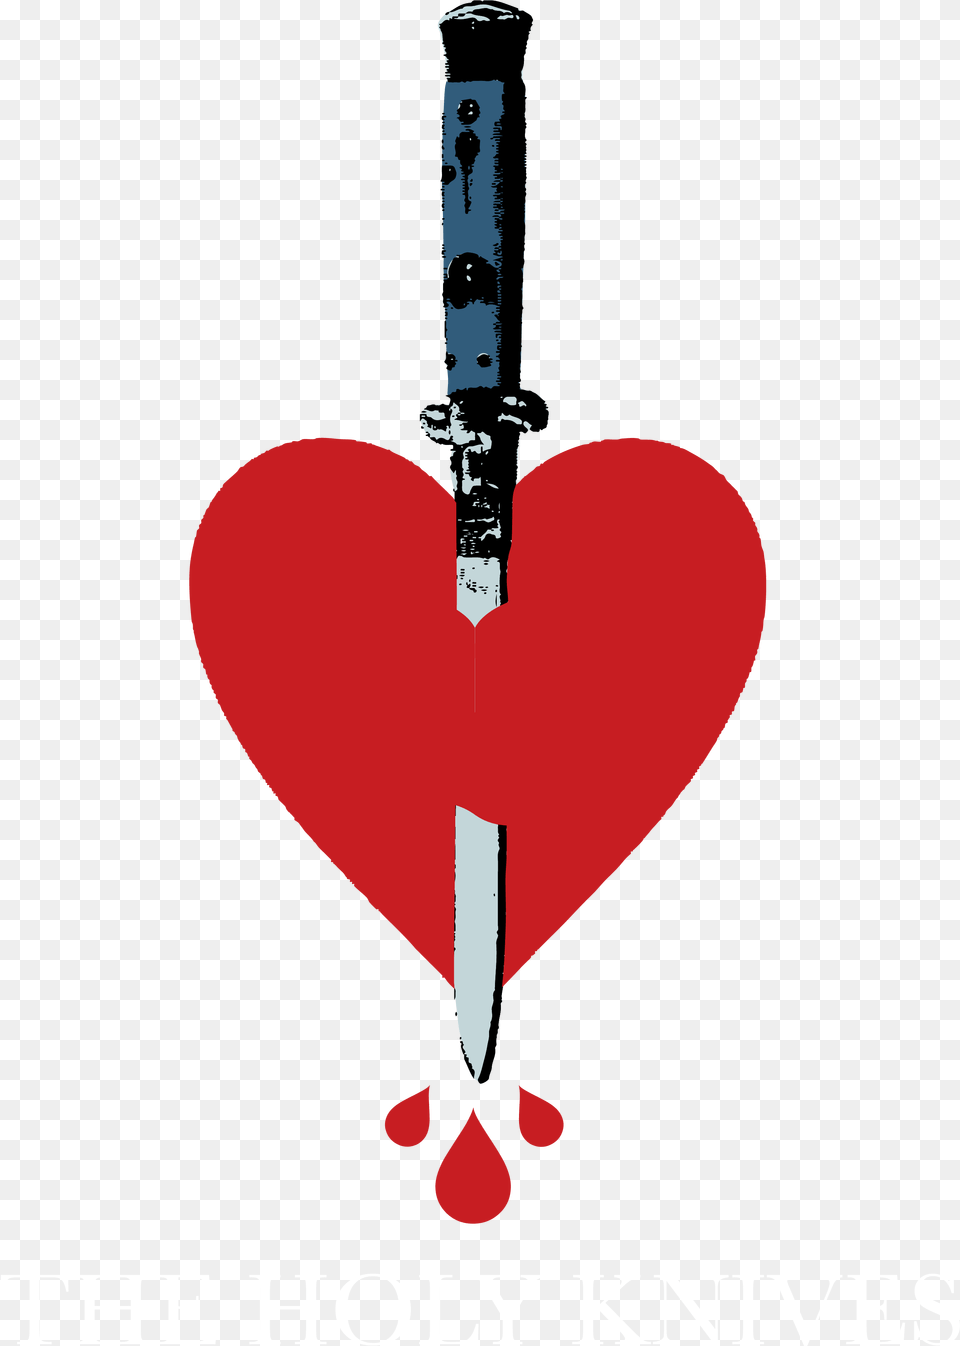 The Holy Knives Heart, Blade, Weapon, Dagger, Knife Png Image